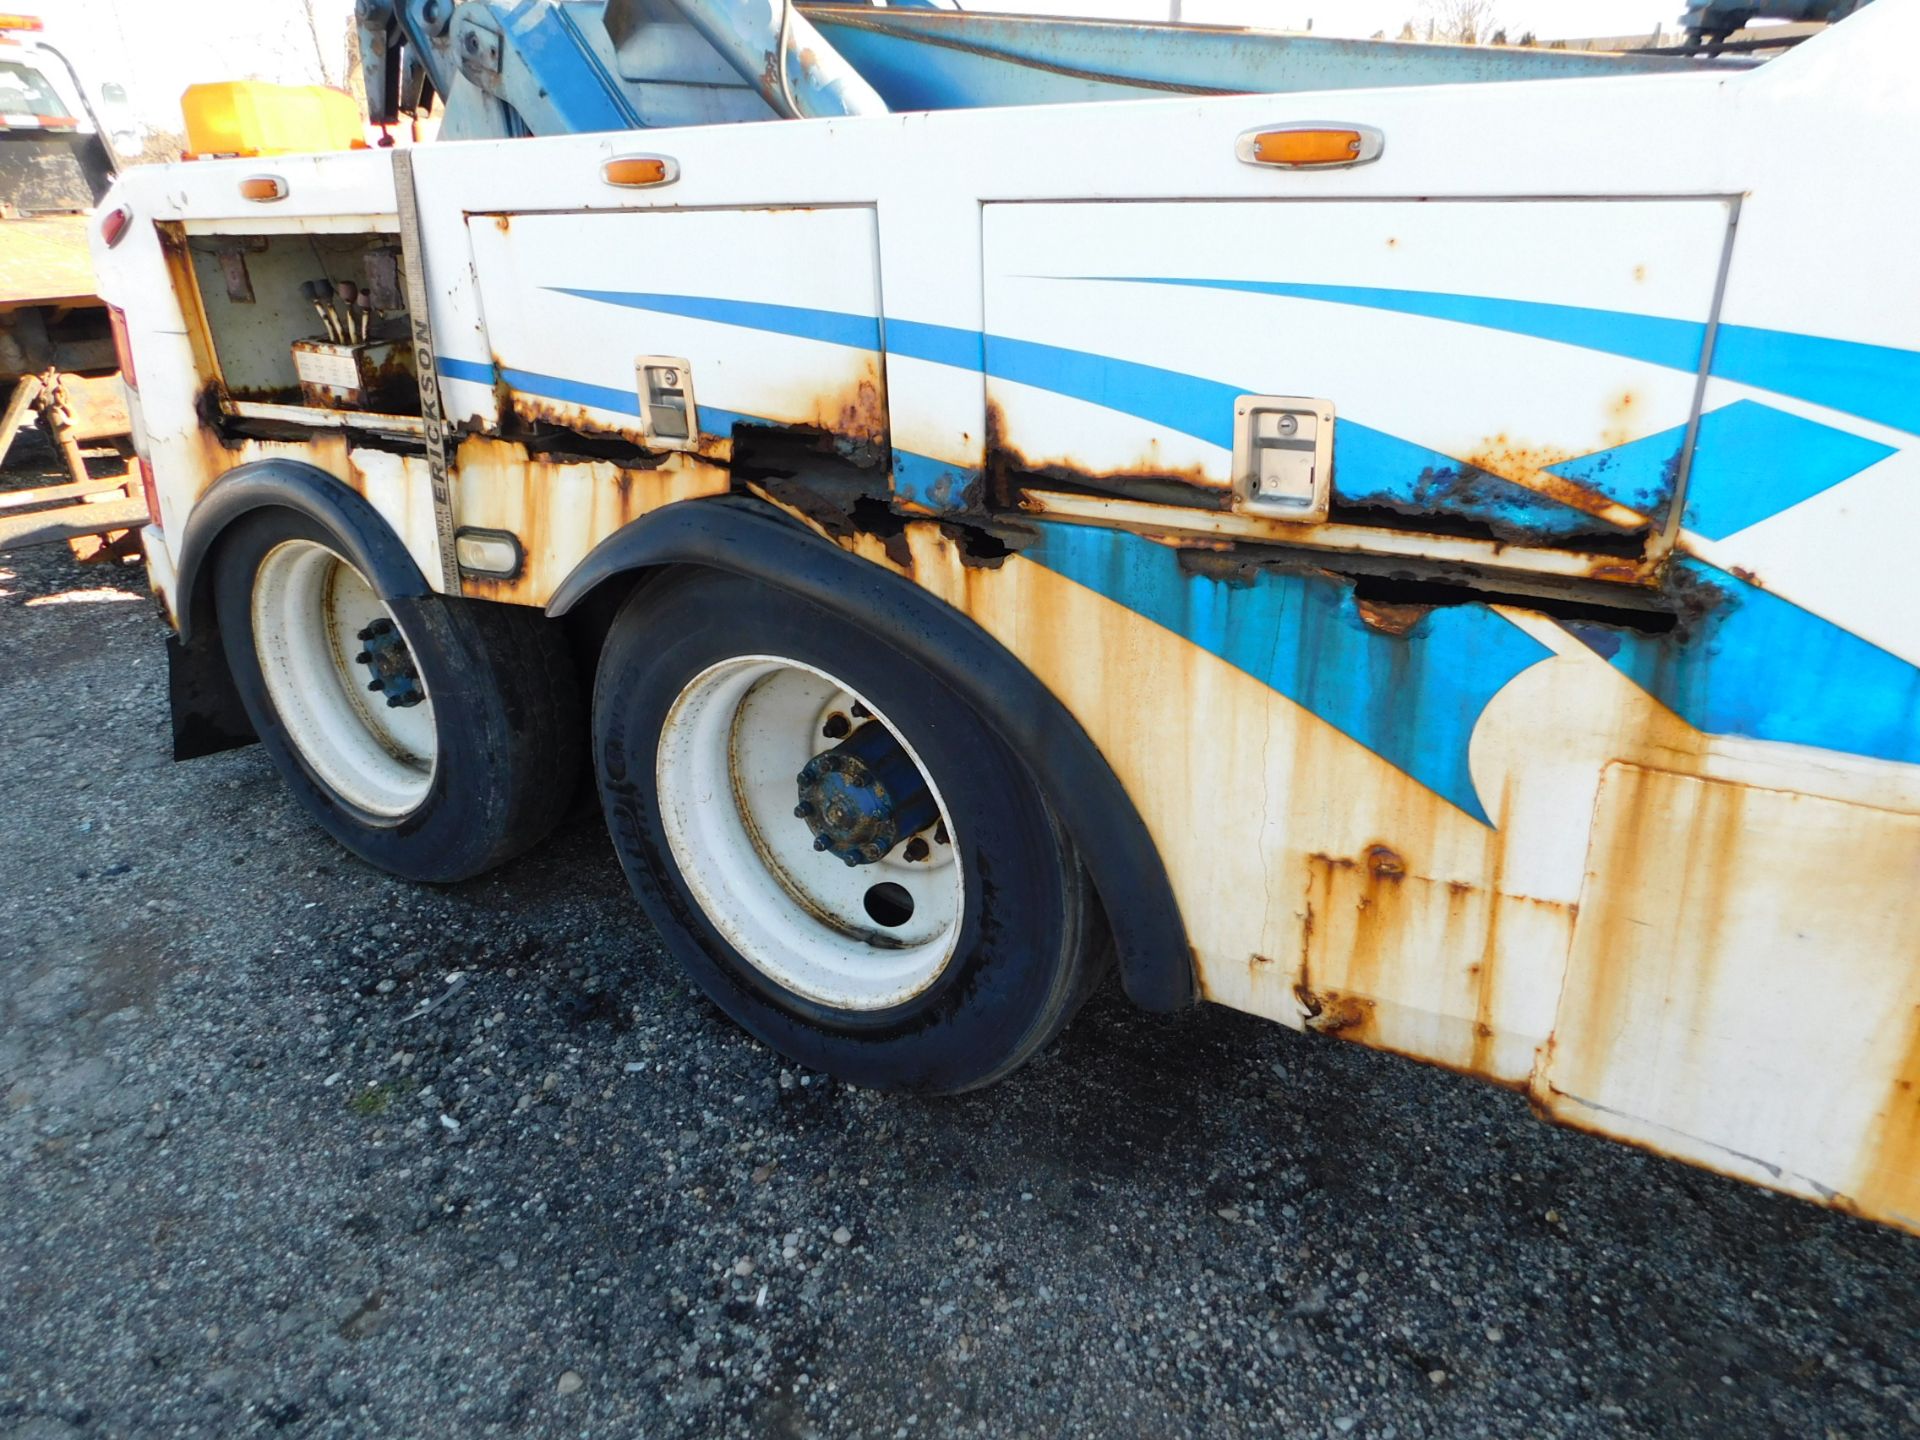 1989 WHITE Volvo GMC Aero Series 60 Heavy Duty Tow Truck, 329,000 miles showing on Odometer, Detroit - Image 6 of 28